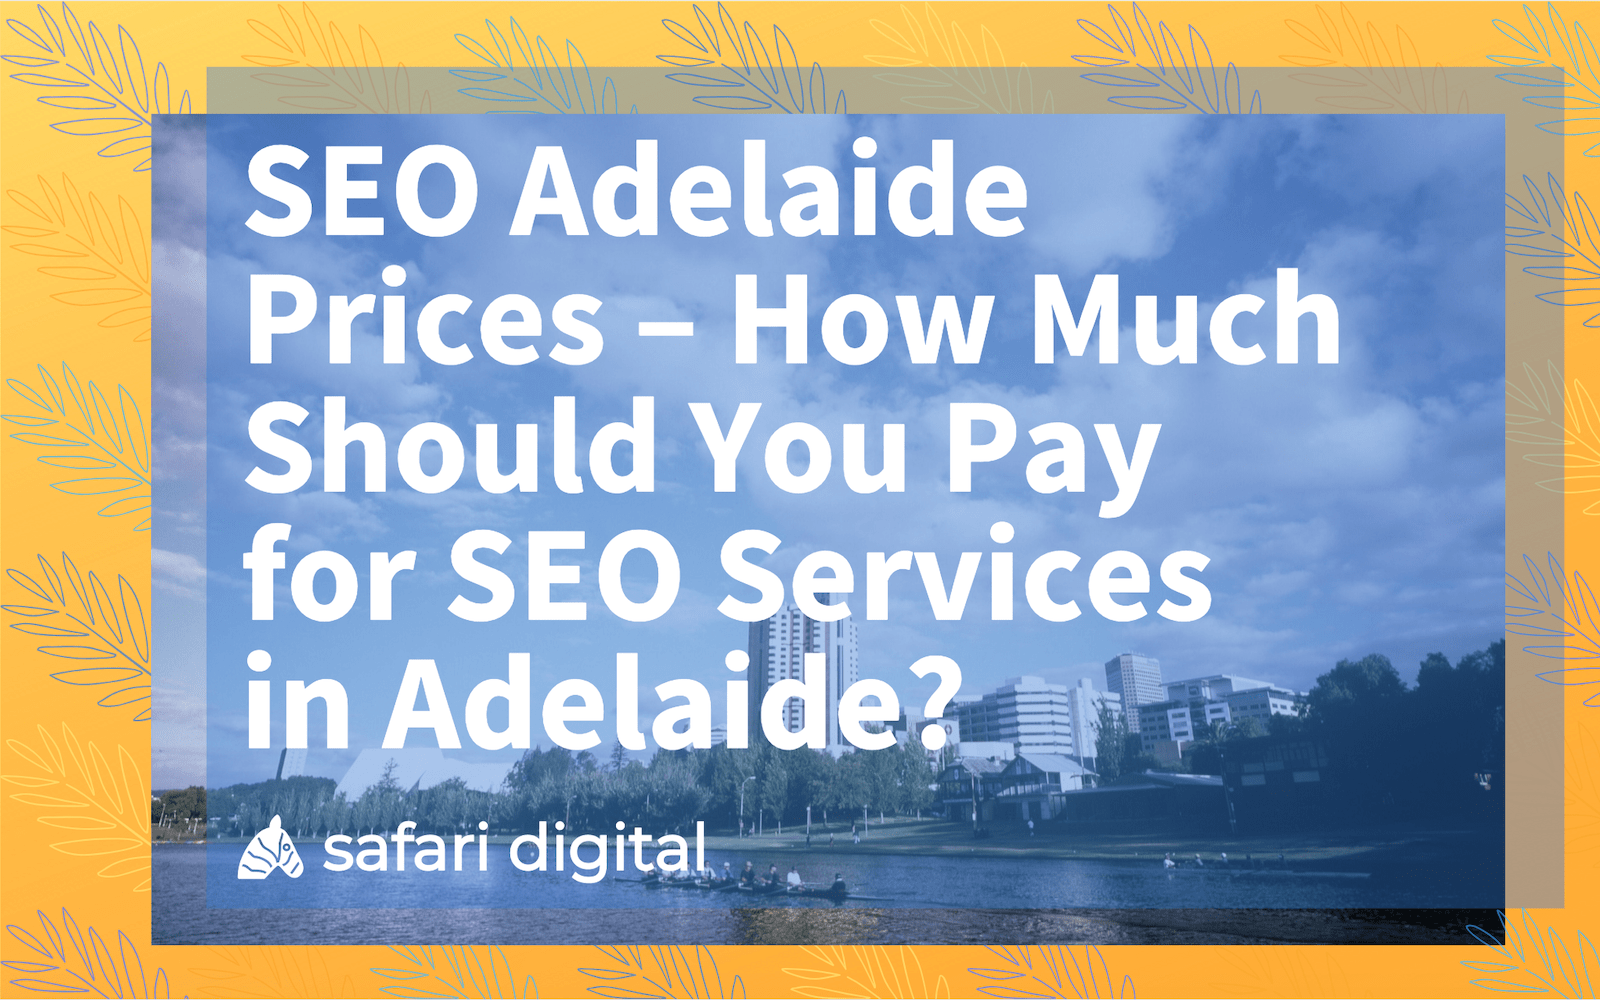 SEO adelaide prices cover image large